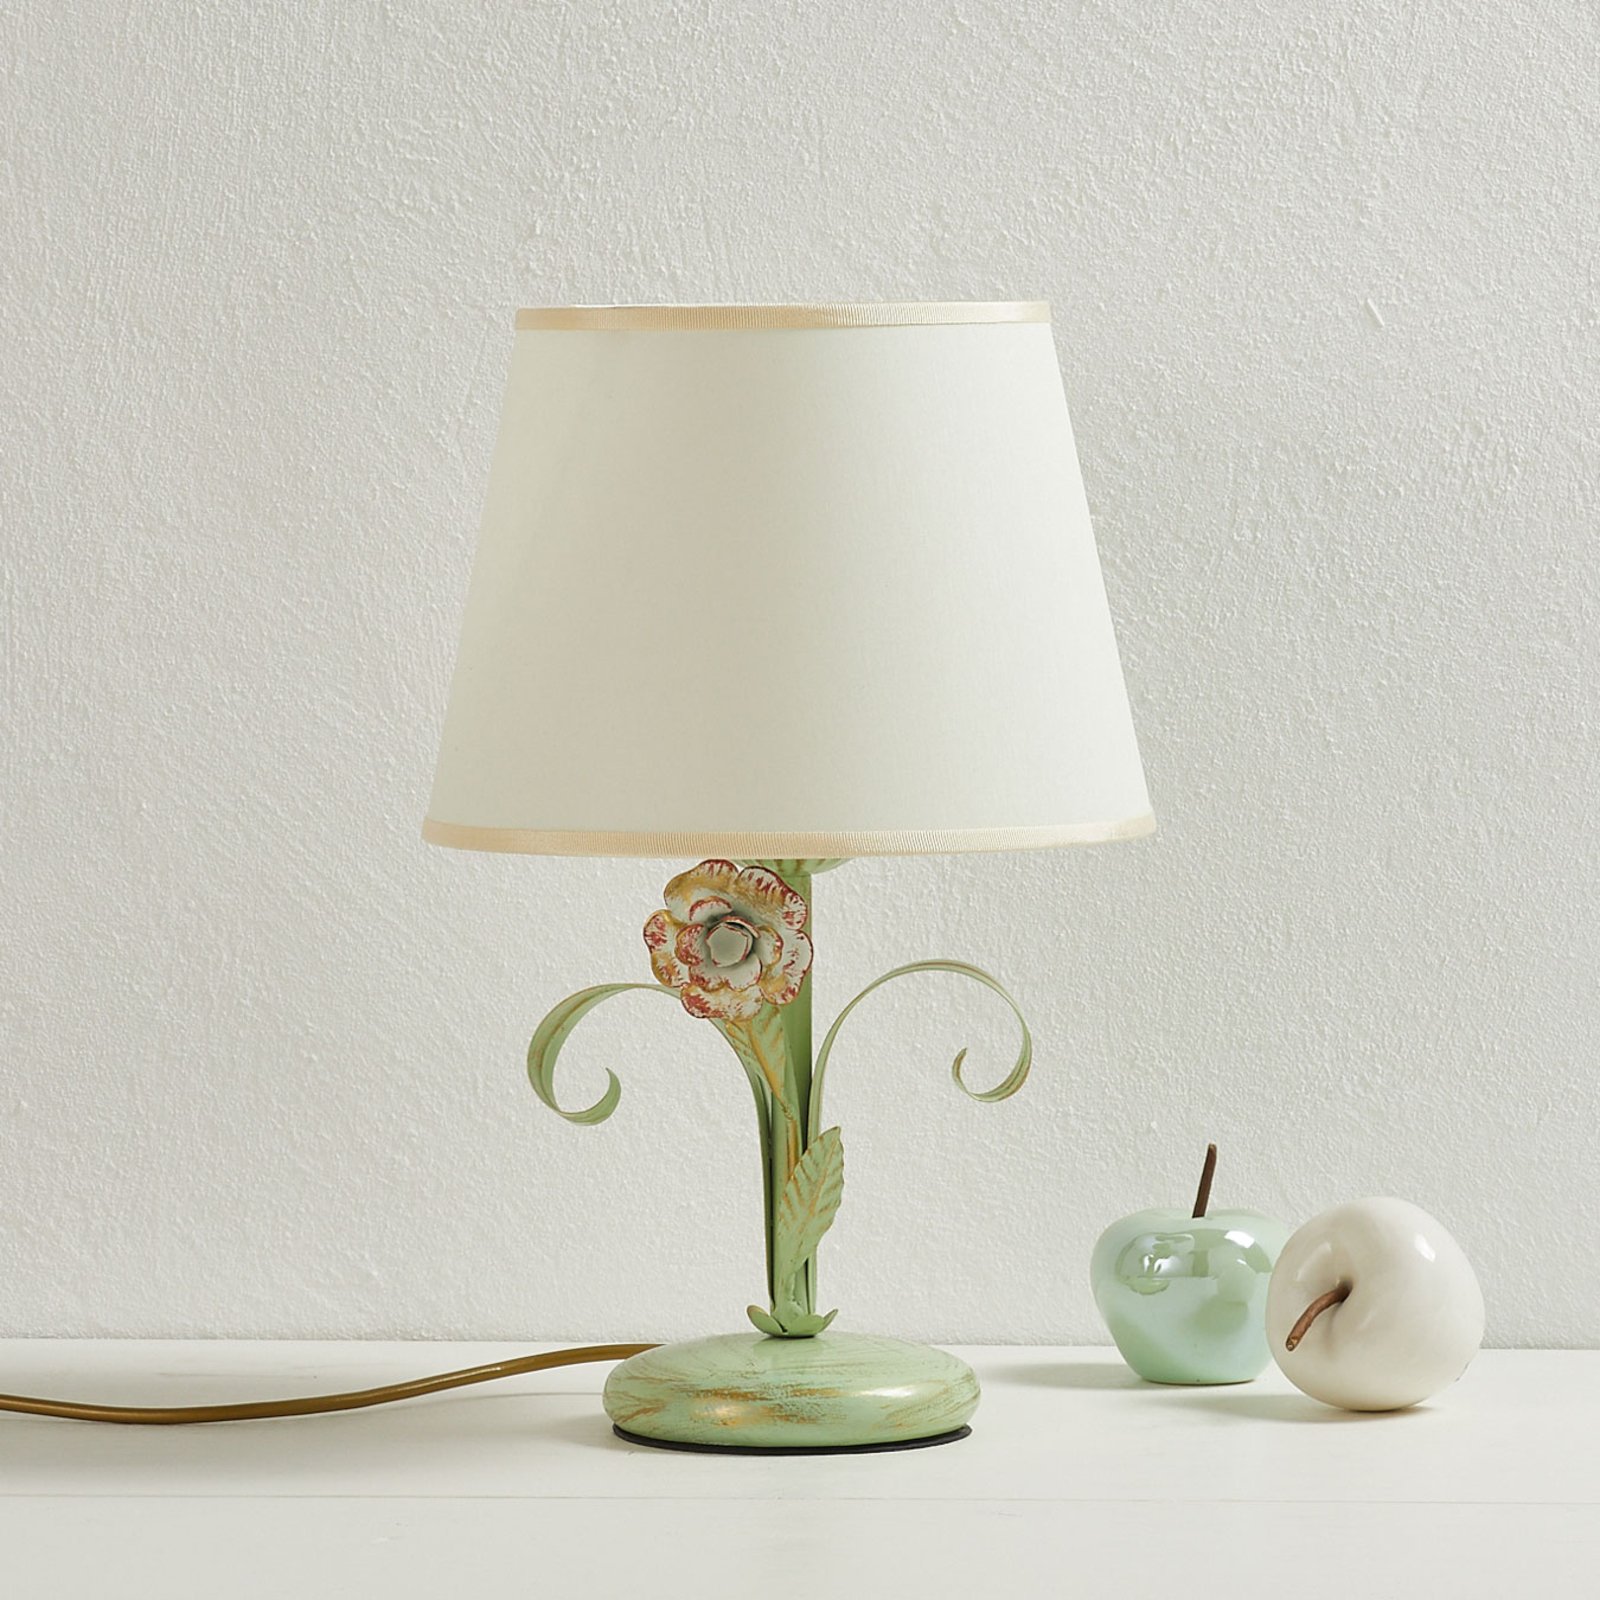 Floine Tulipe Table Lamp Lights Co Uk, Cottage Style Table Lamps Uk